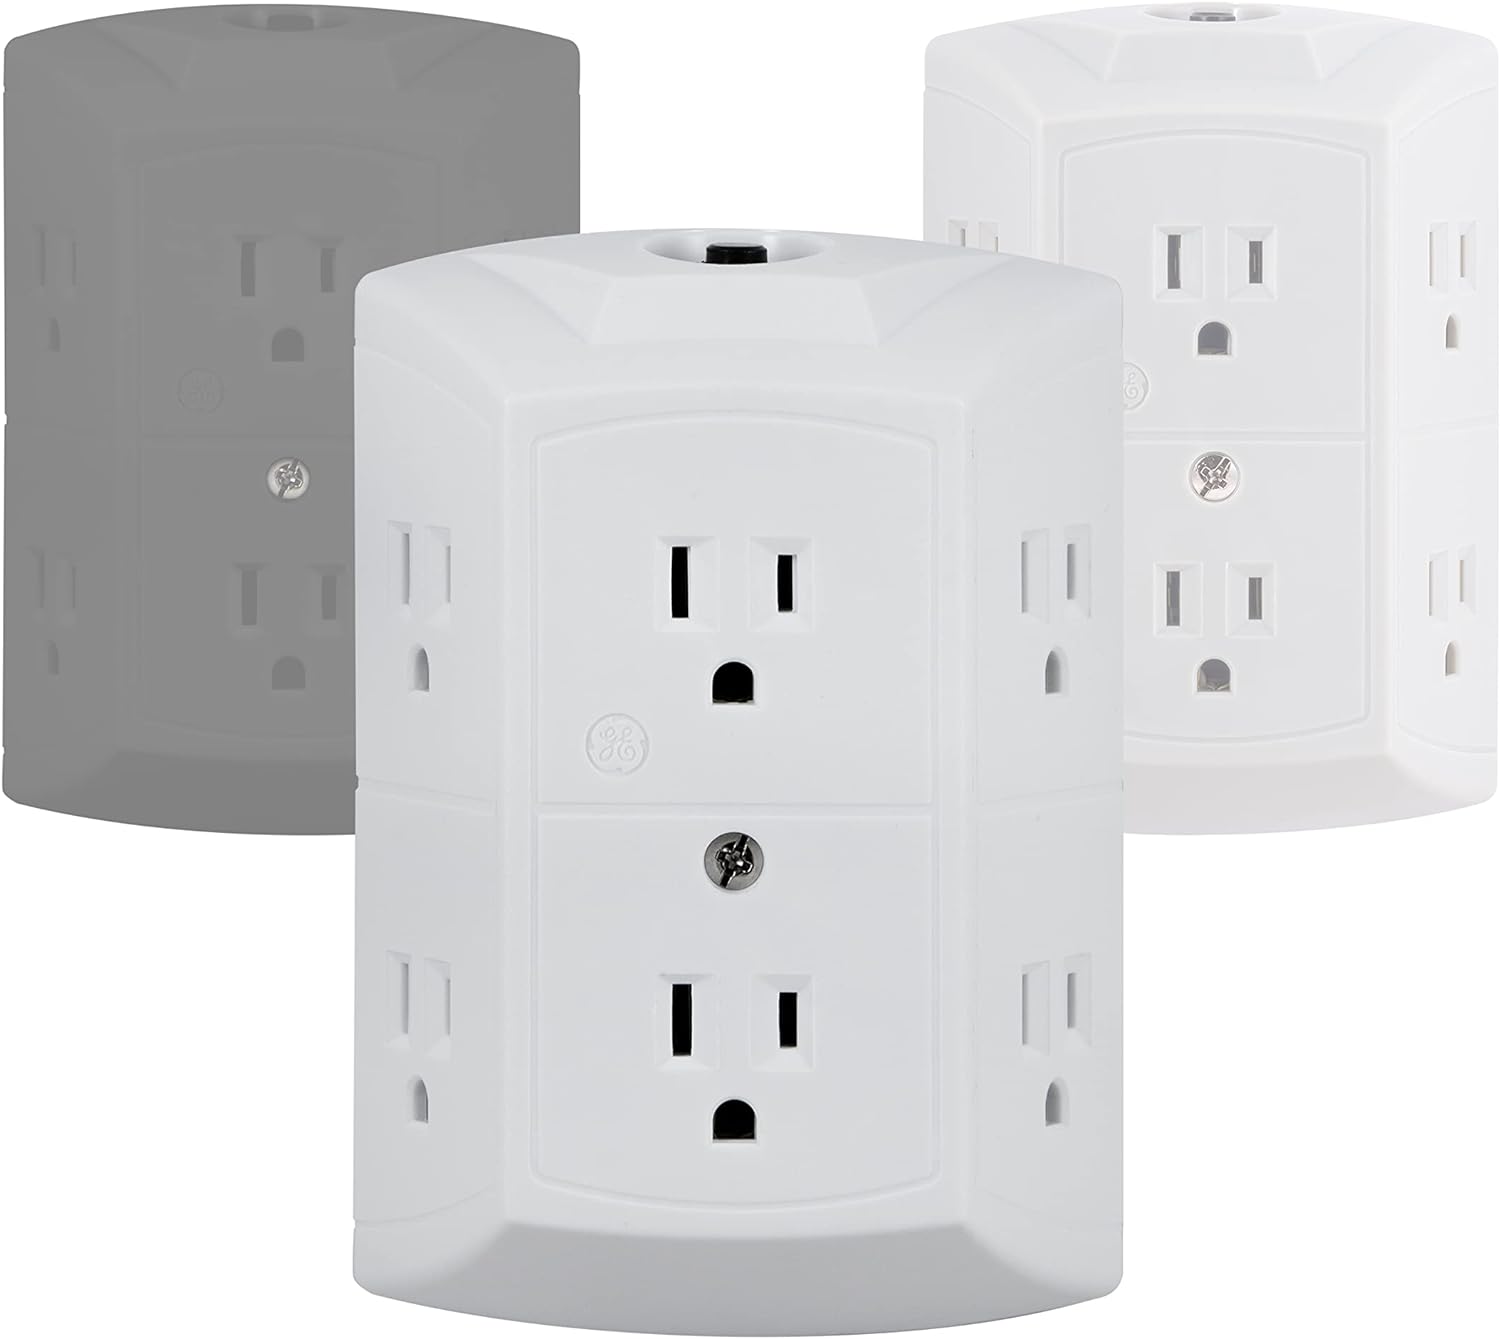 GE 6-Outlet Extender, Grounded Wall Tap, Reset Button, Circuit Breaker, Adapter Spaced Outlets, 3-Prong, Multiple Plug, Quick and Easy Install, Cruise Essentials, UL Listed, White, 56575